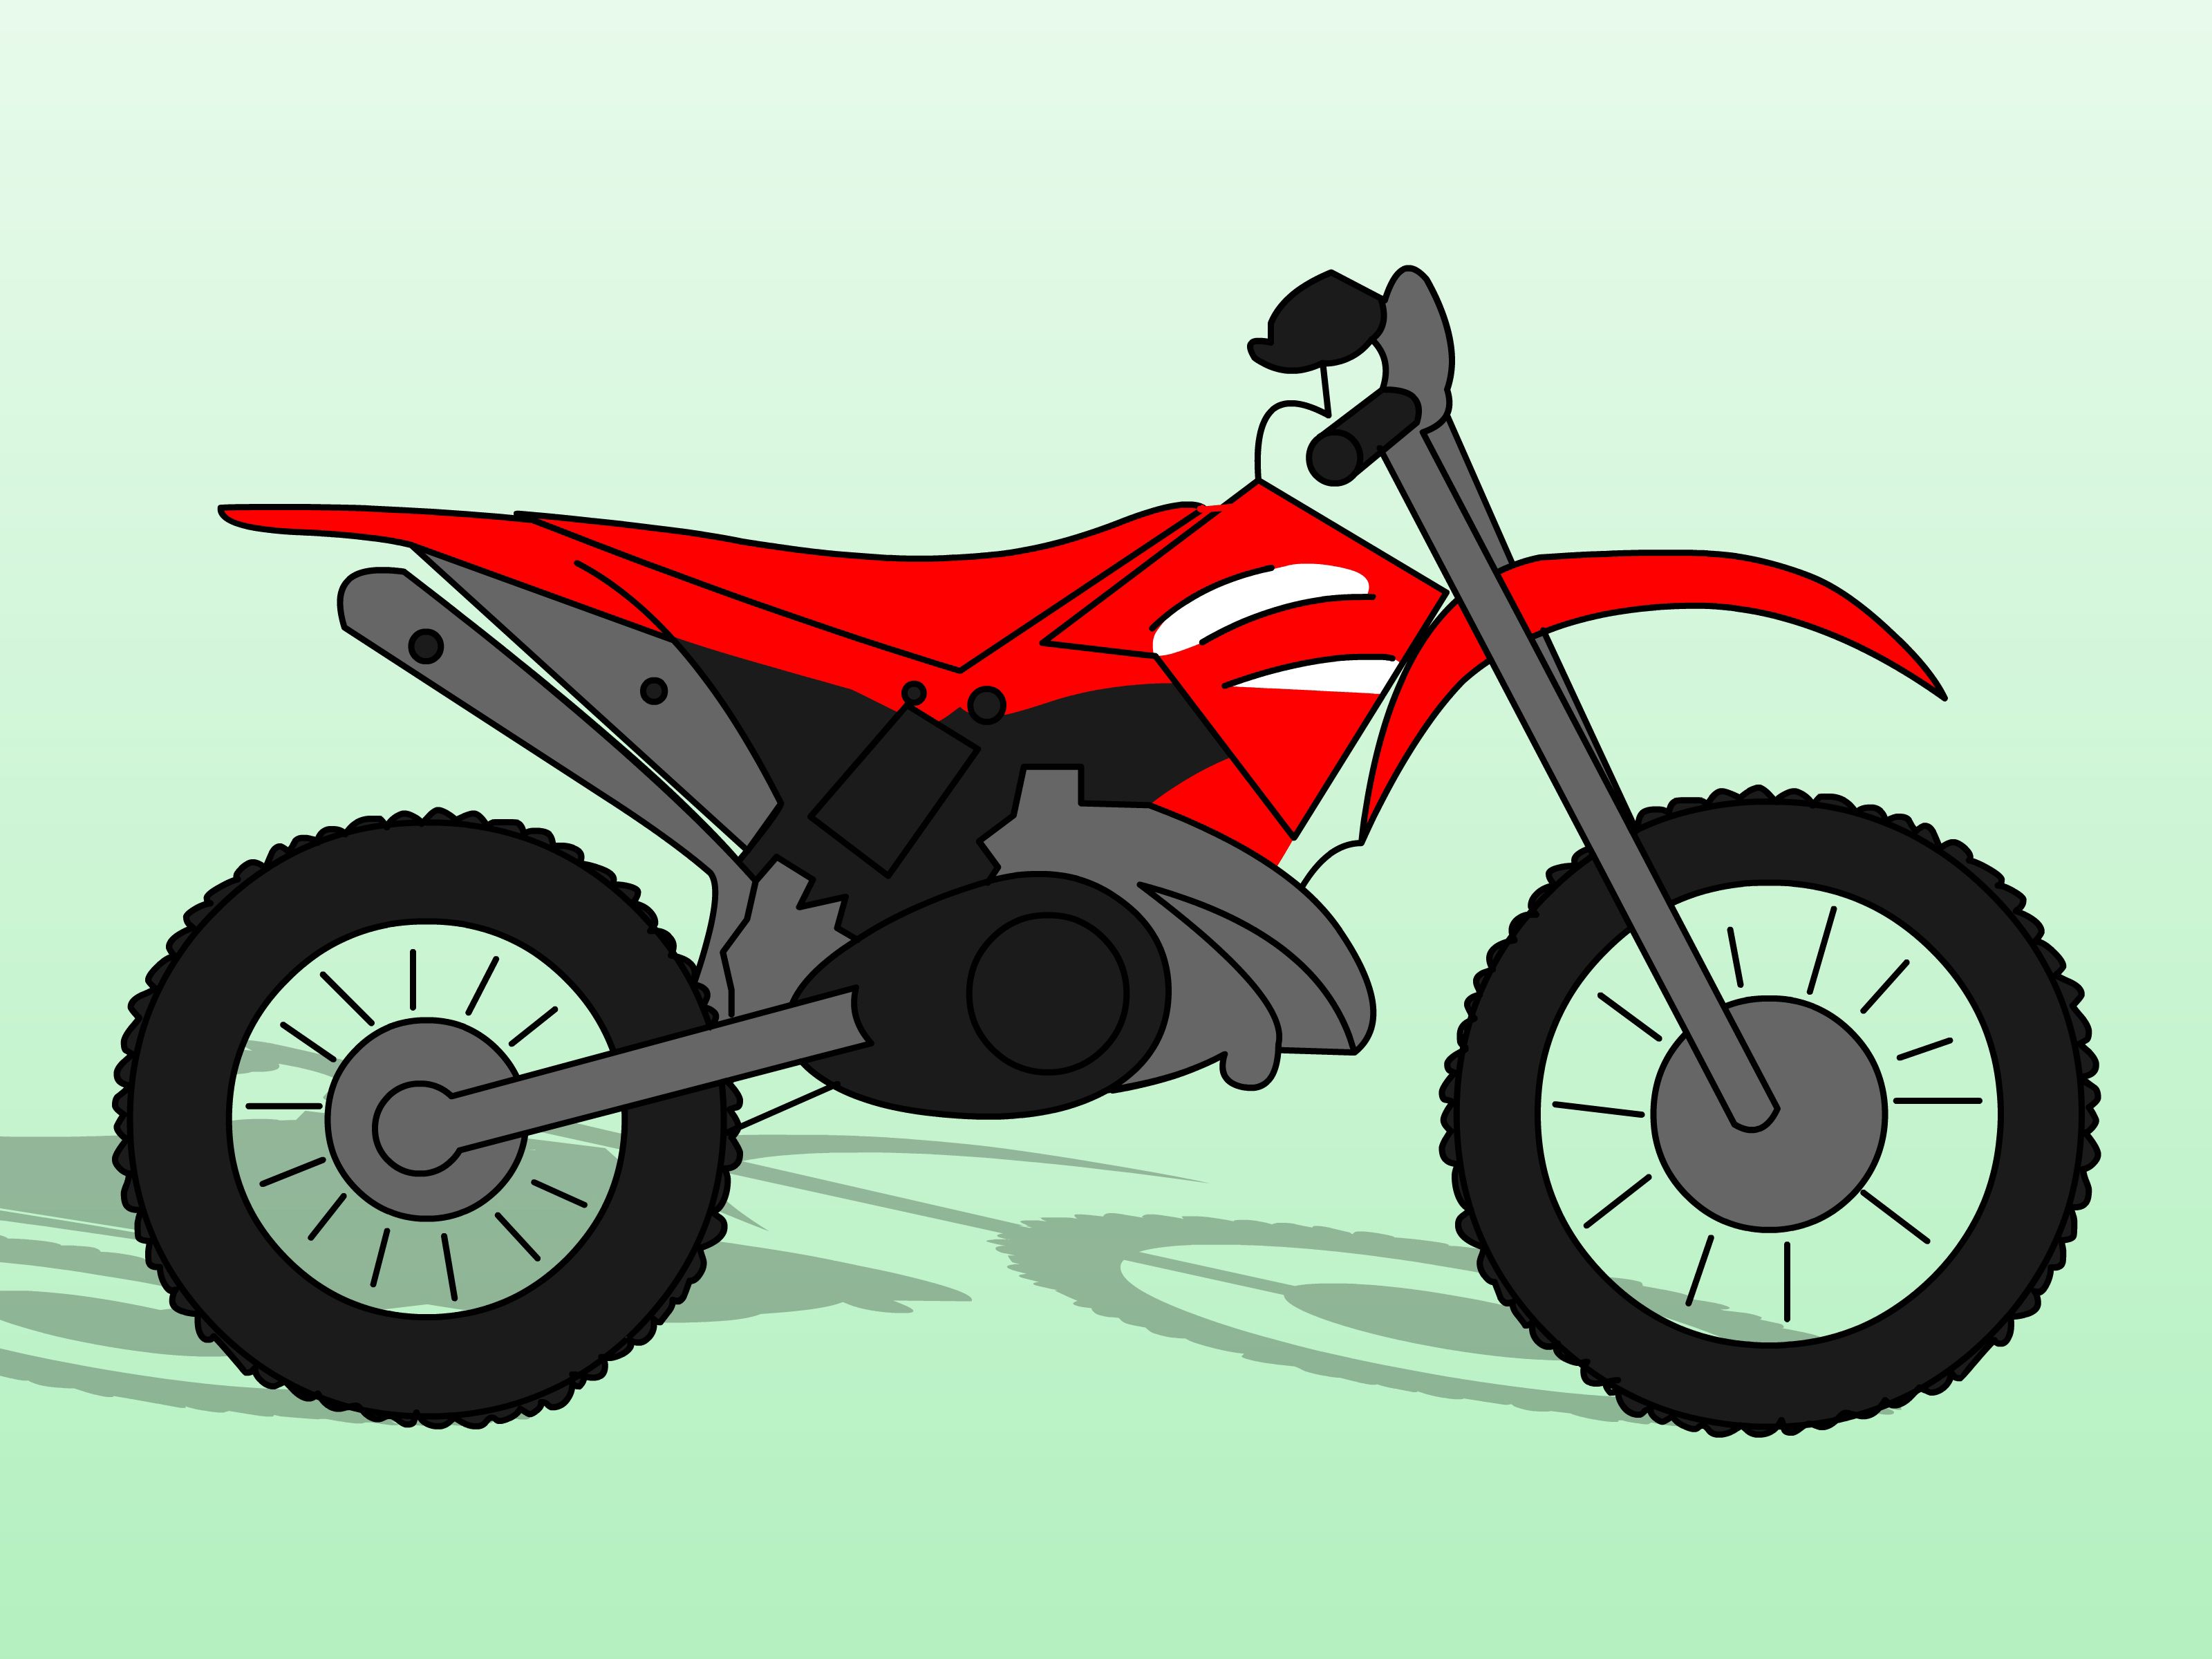 Great How To Draw A Dirt Bike of all time Learn more here 